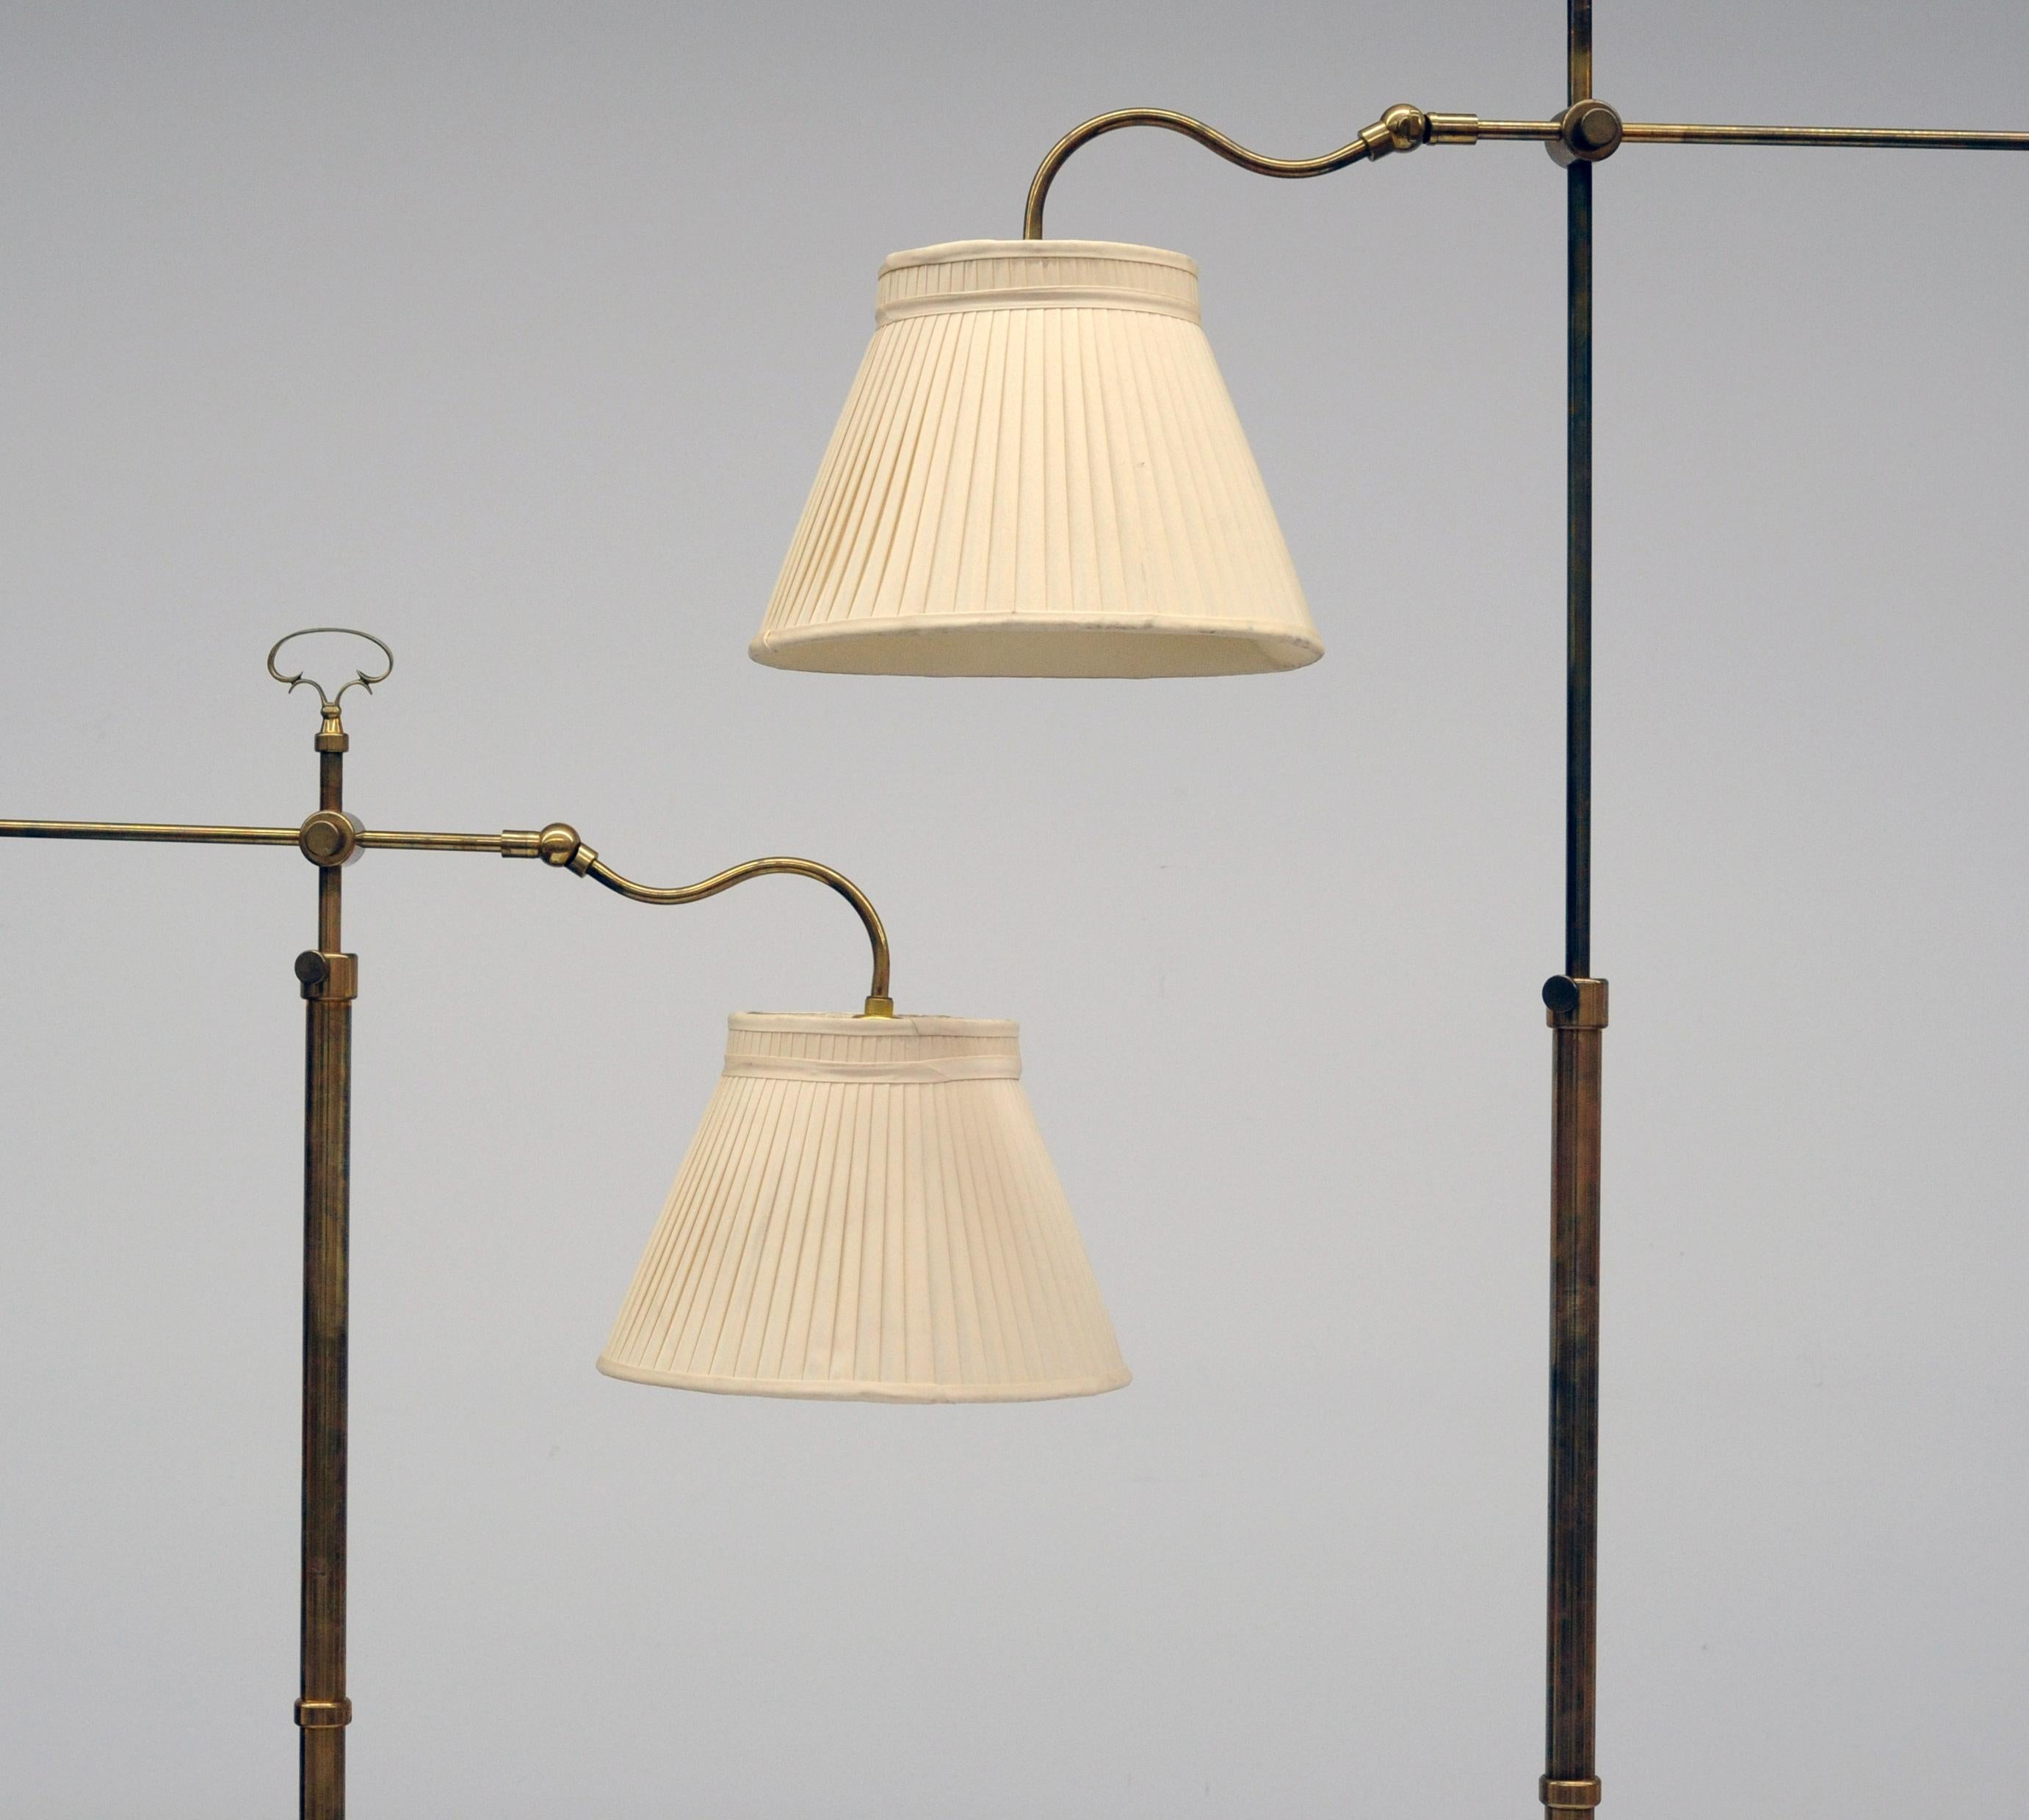 Unusual and appealing fully adjustable brass floor lamps. Clever designs allows for great versatility for directing light.